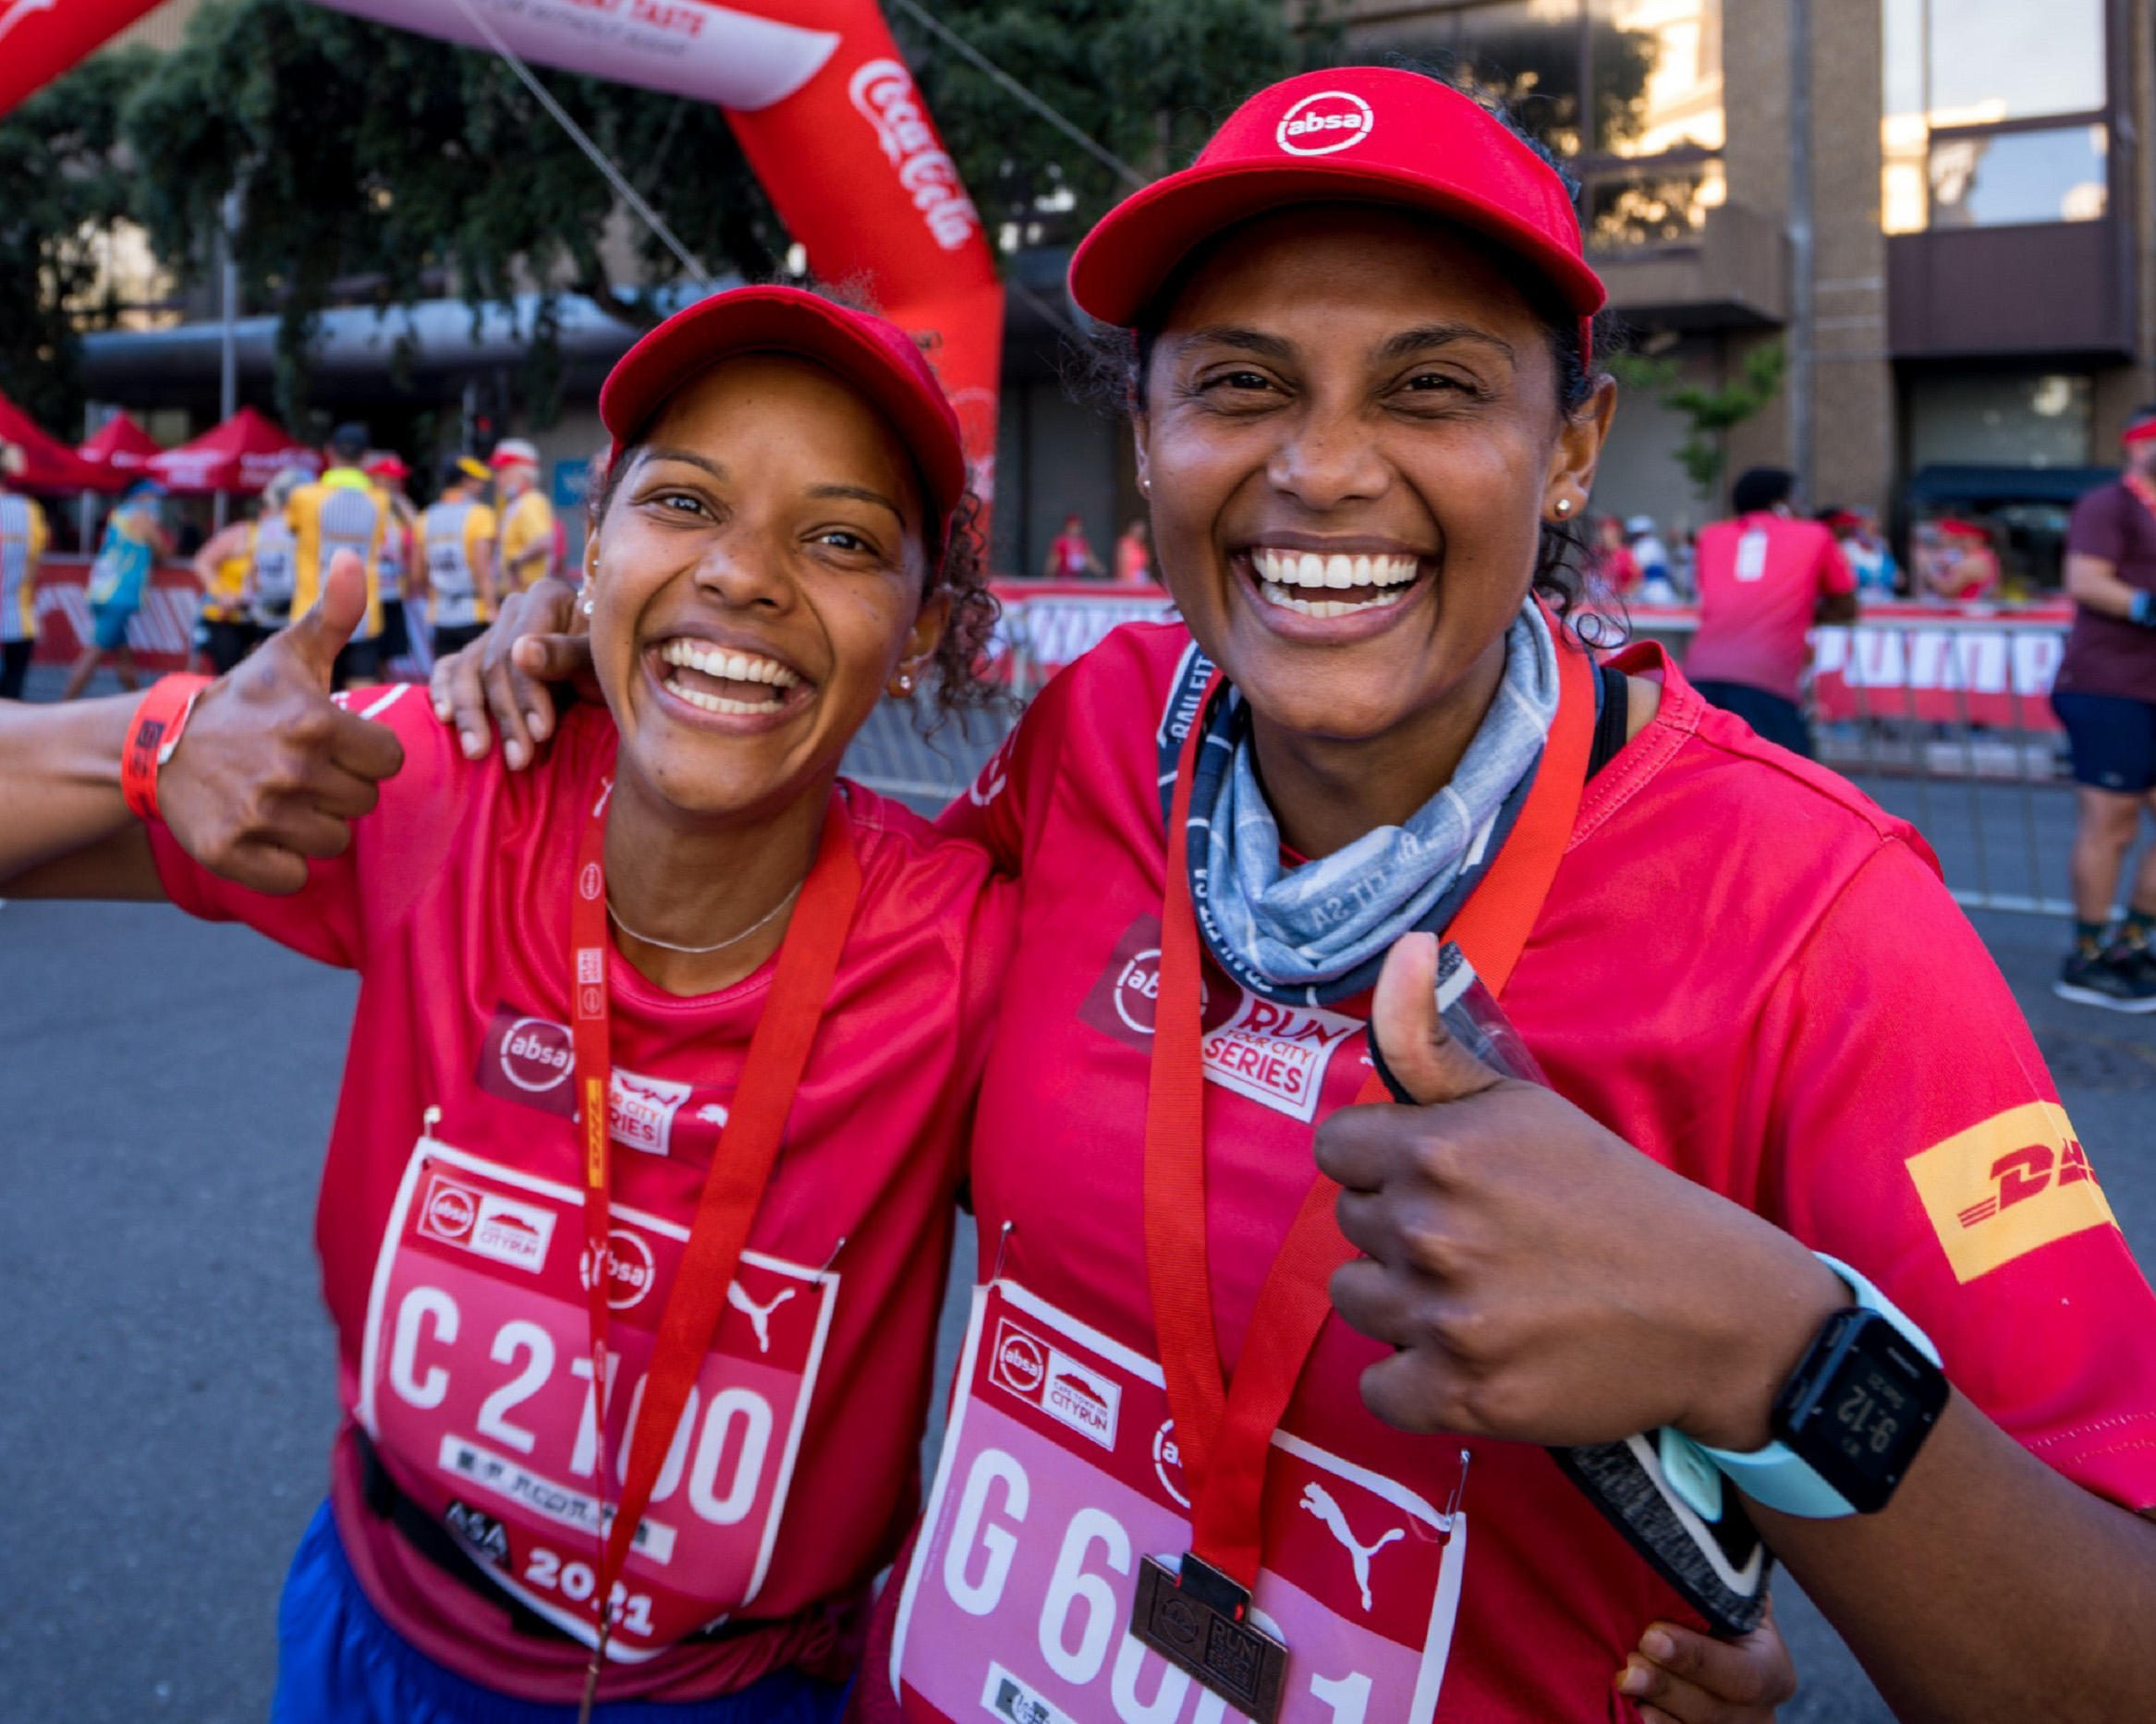 Free Rapid Antigen Tests for Unvaccinated Runners at Absa RUN YOUR CITY Events